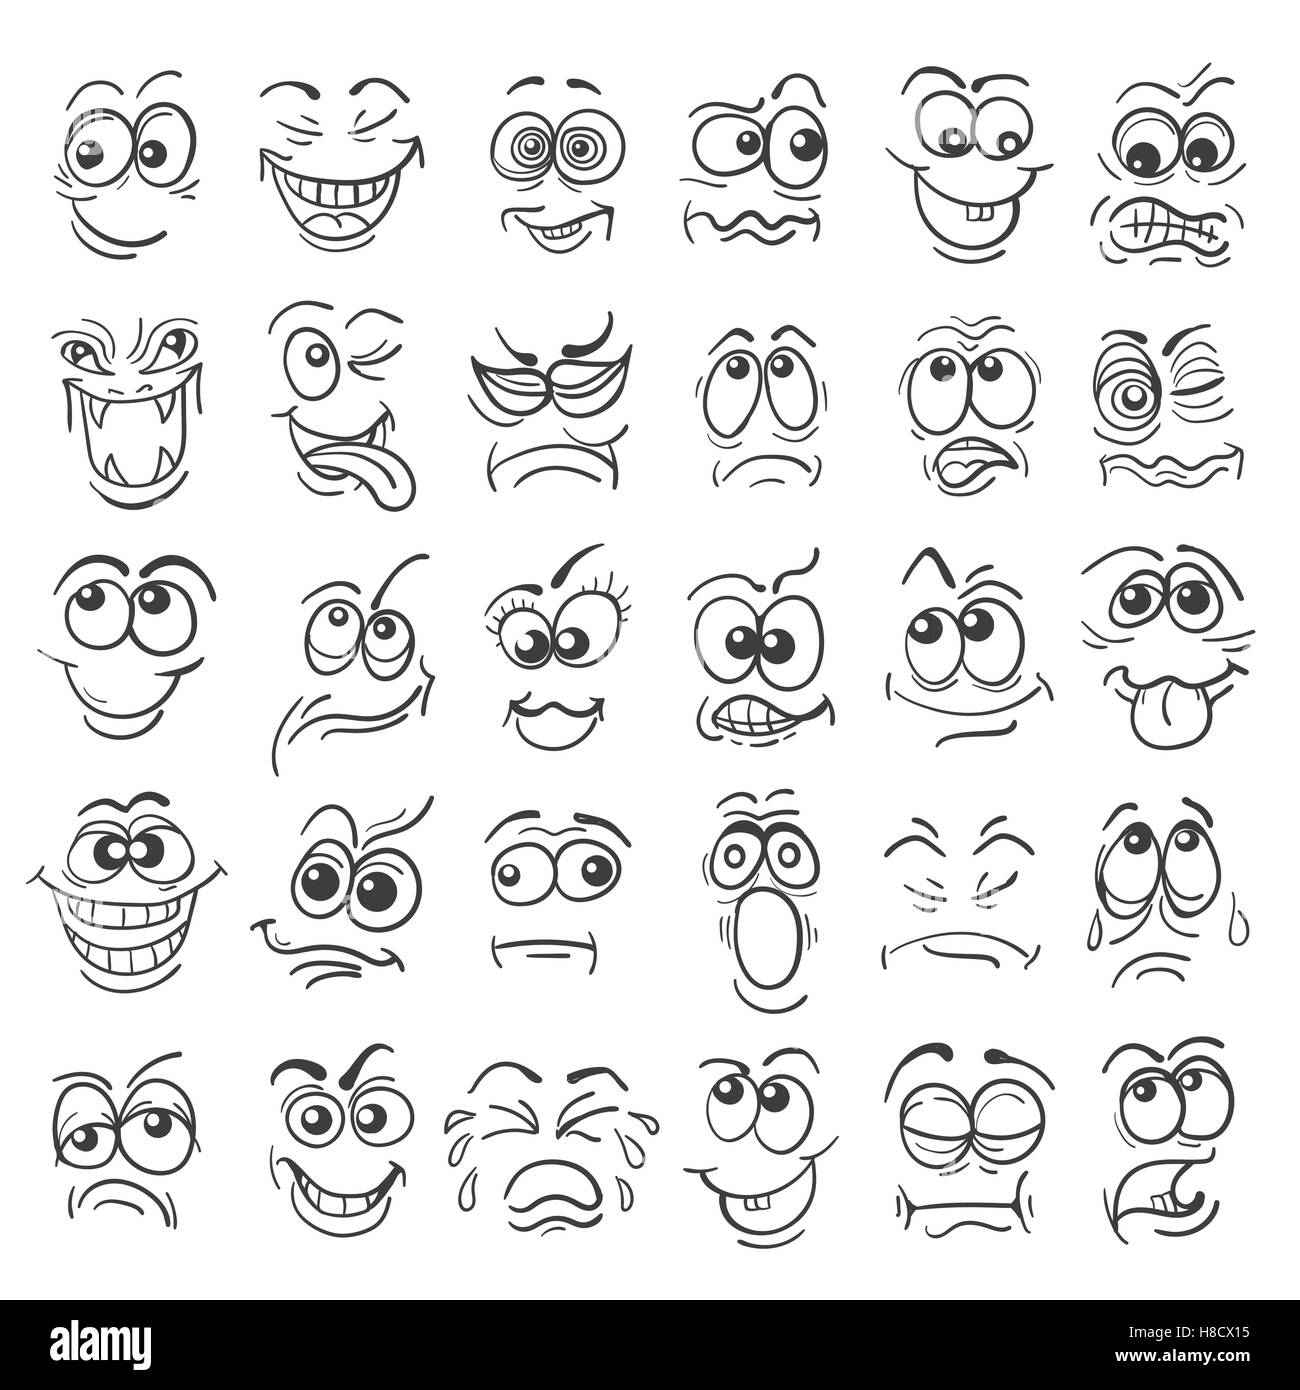 Emotion And Facial Expression 93